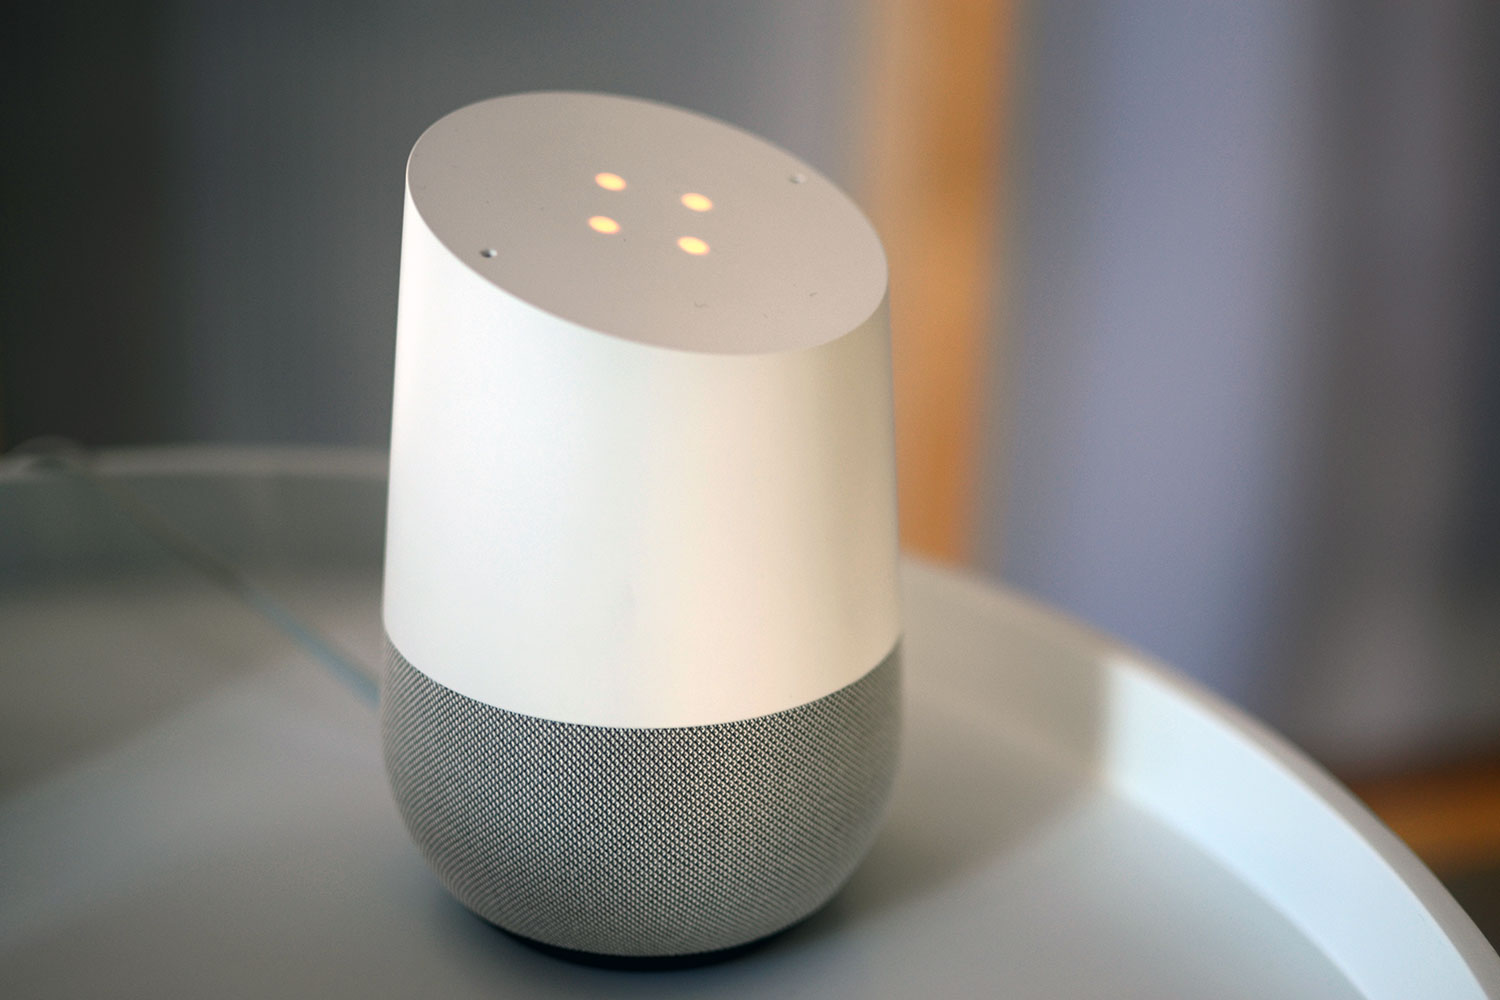 google home multi user support comes to uk